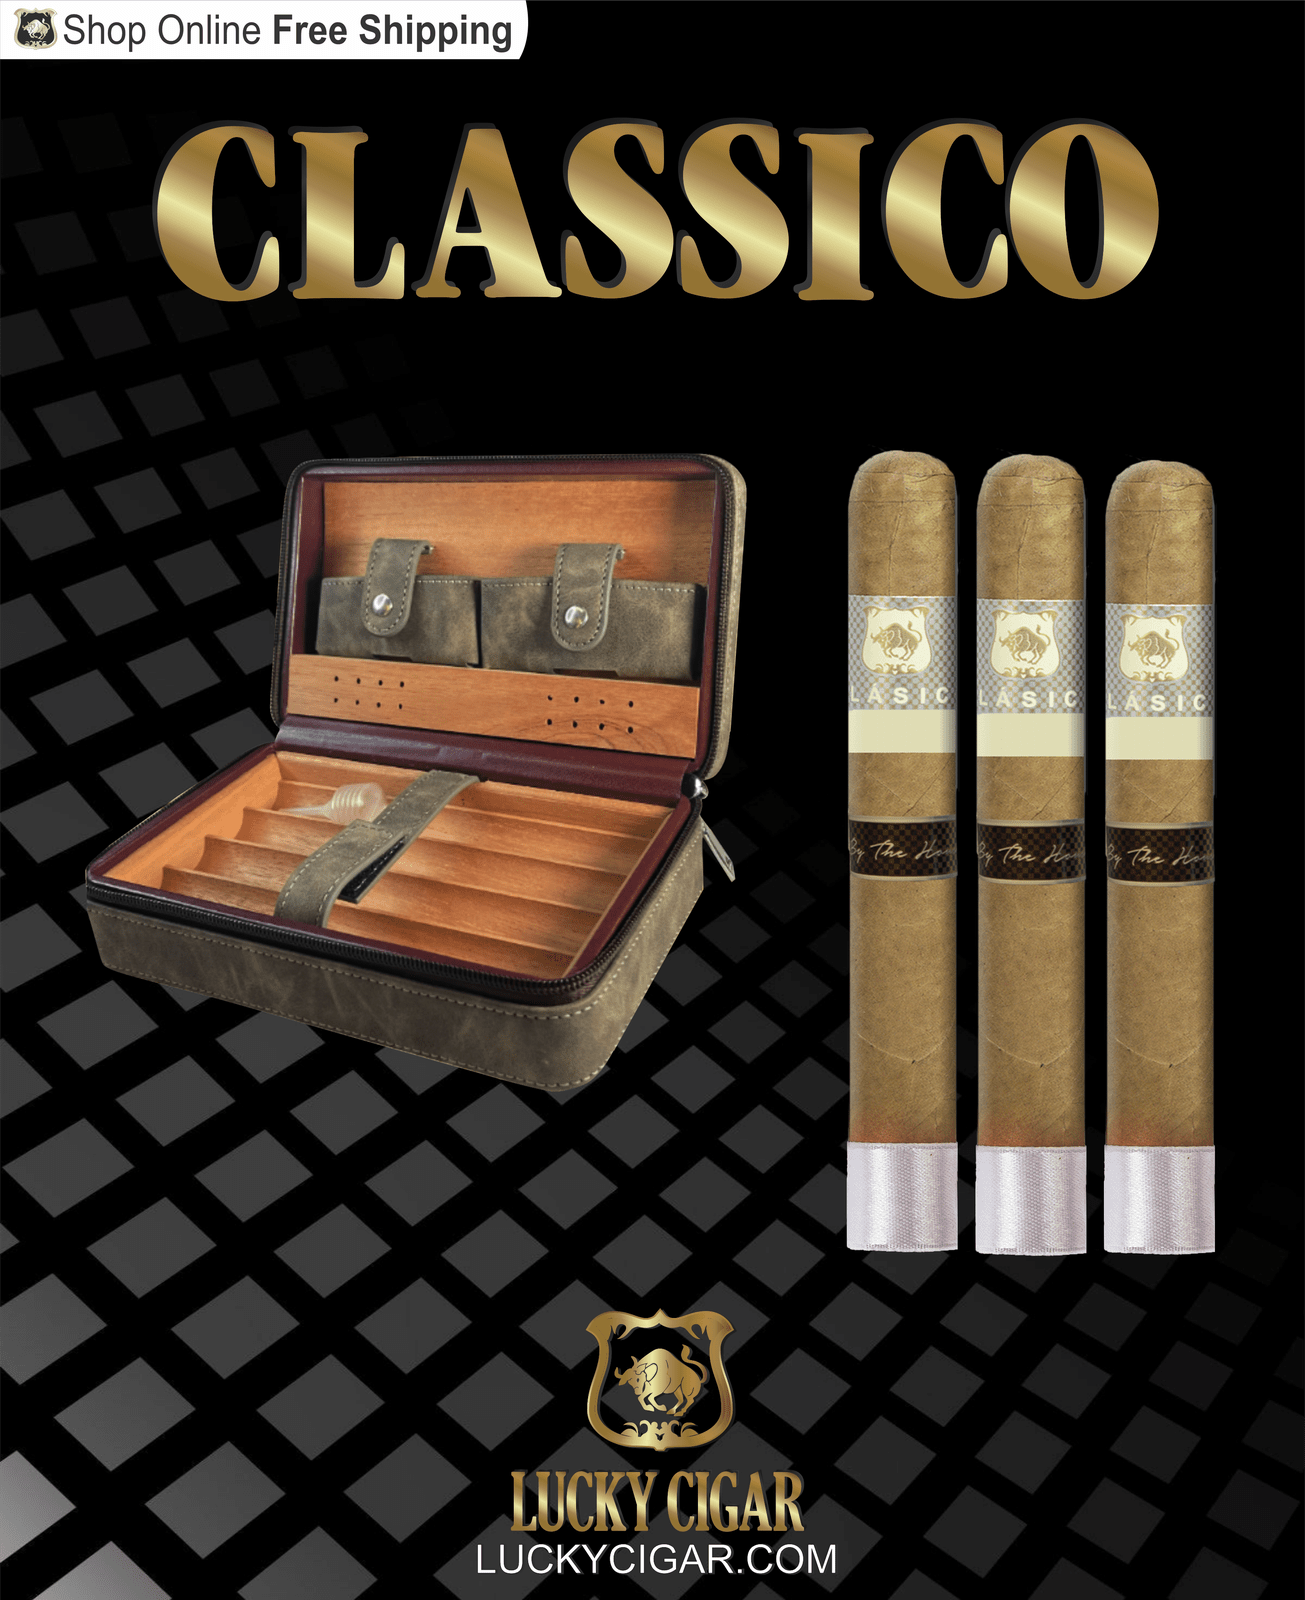 Lucky Cigar Sampler Sets: Set of 3 Classico Toro Cigars with Travel Humidor Case